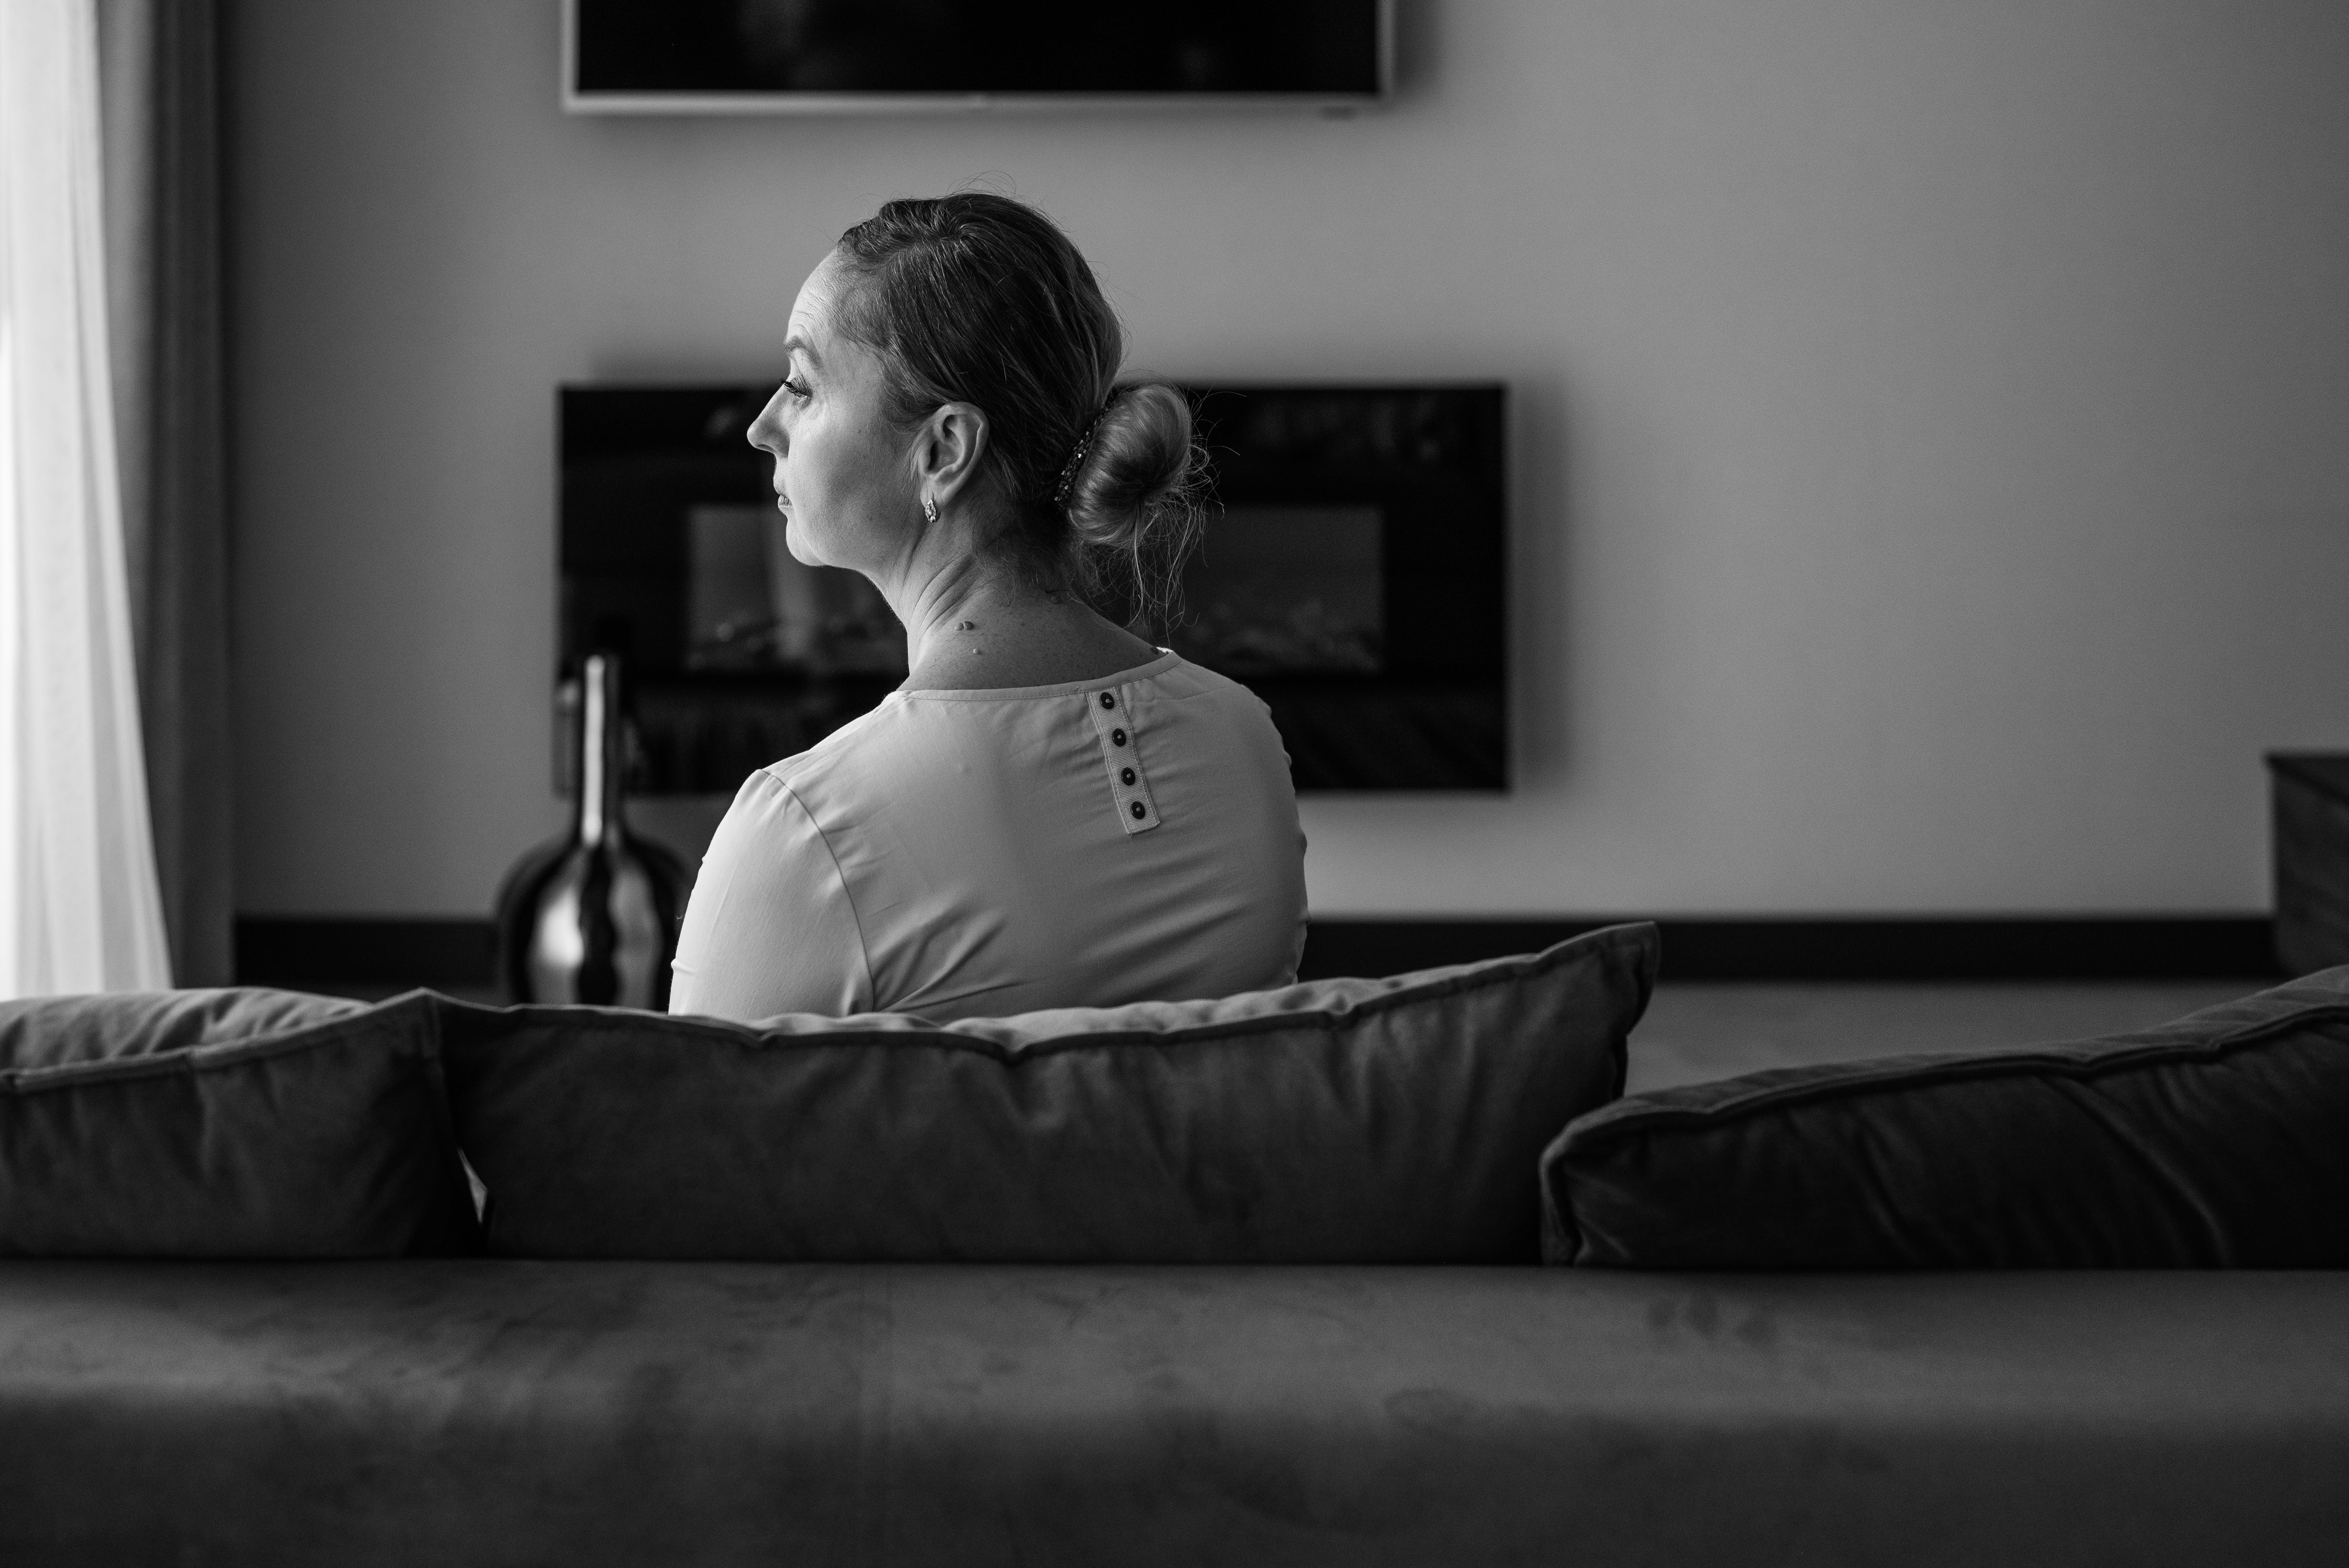 A woman sitting on the couch while looking out the window | Source: Pexels